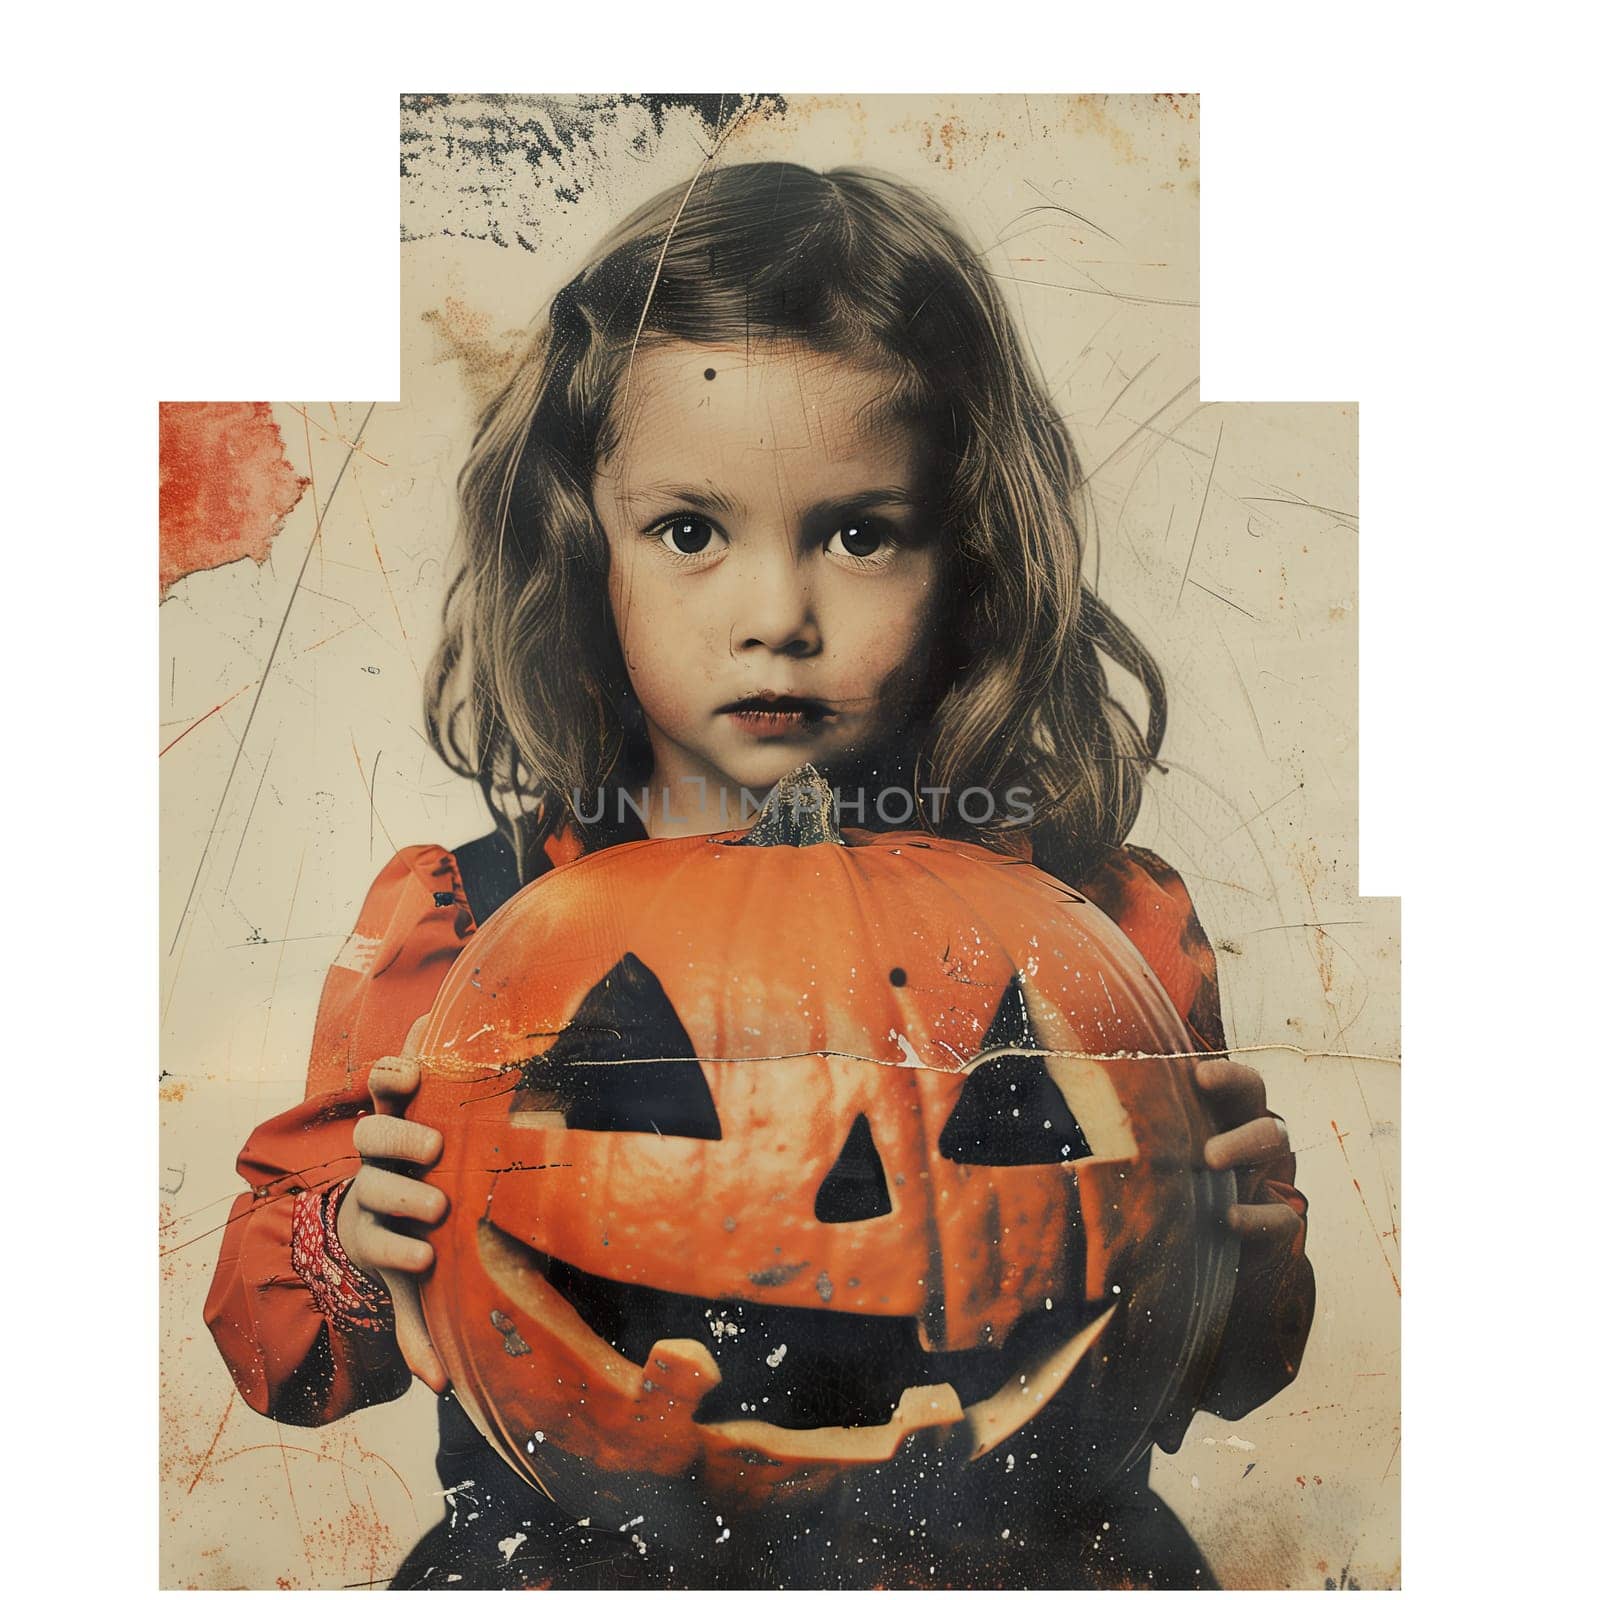 Cut out retro photo of halloween girl with pumpkin by Dustick